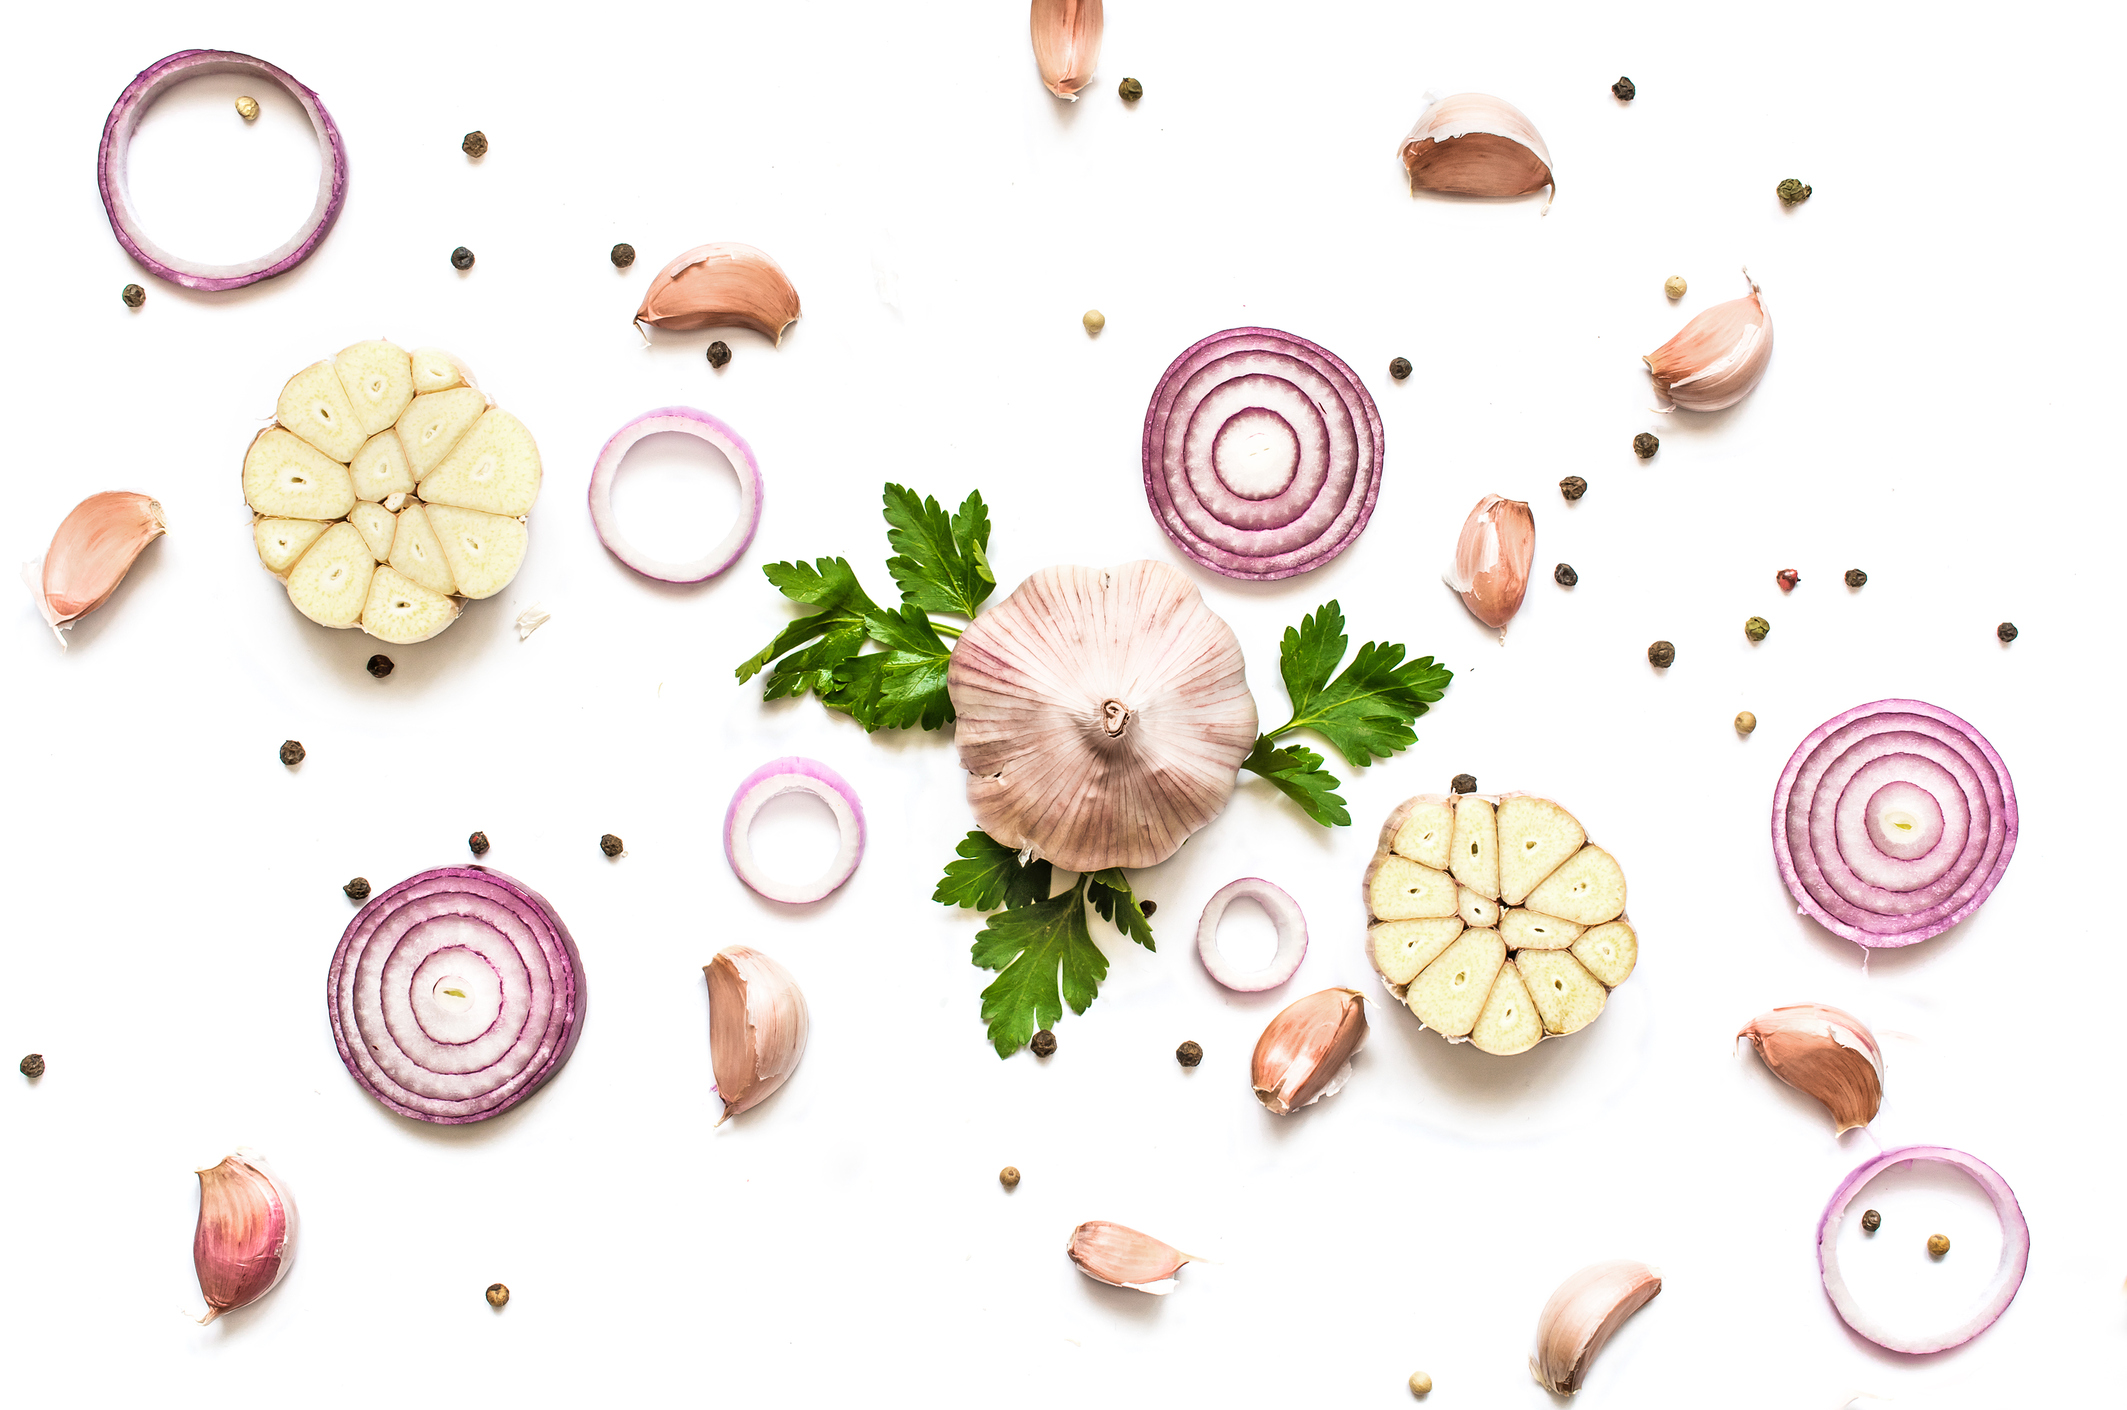 garlic, red onion, parsley and pepper isolated on white background.